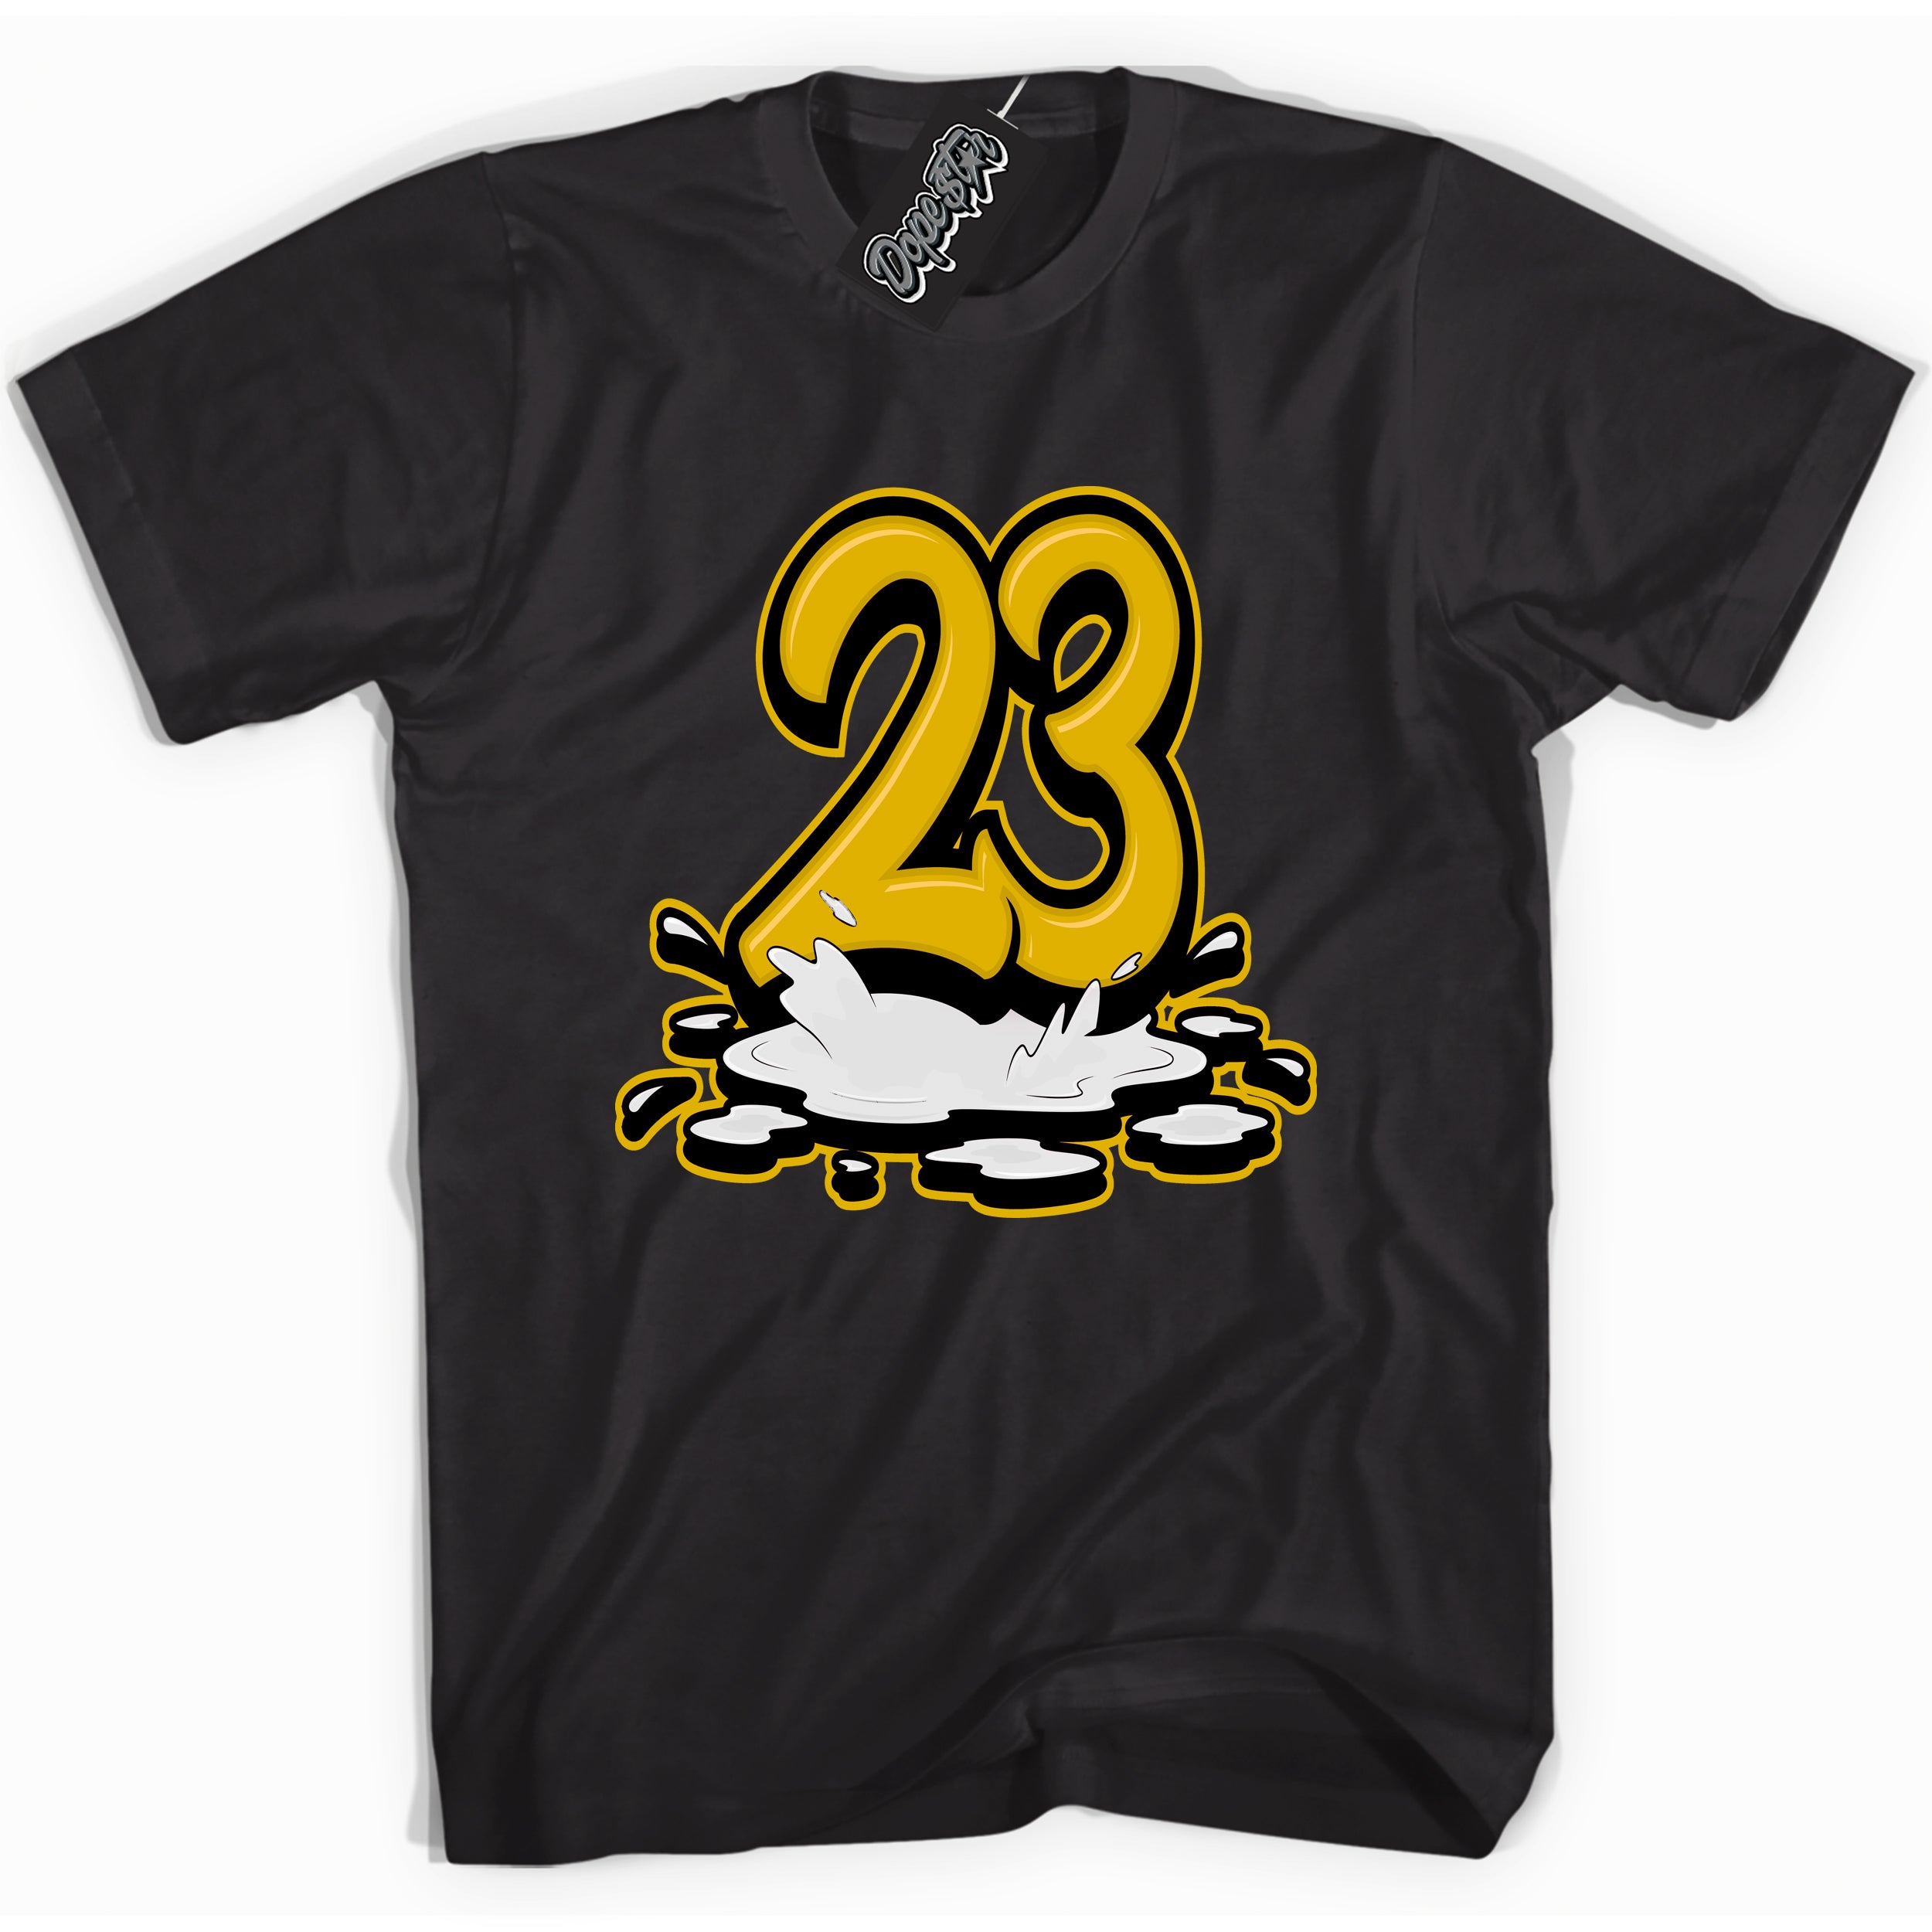 Cool Black Shirt with “ 23 Melting ” design that perfectly matches Yellow Ochre 6s Sneakers.